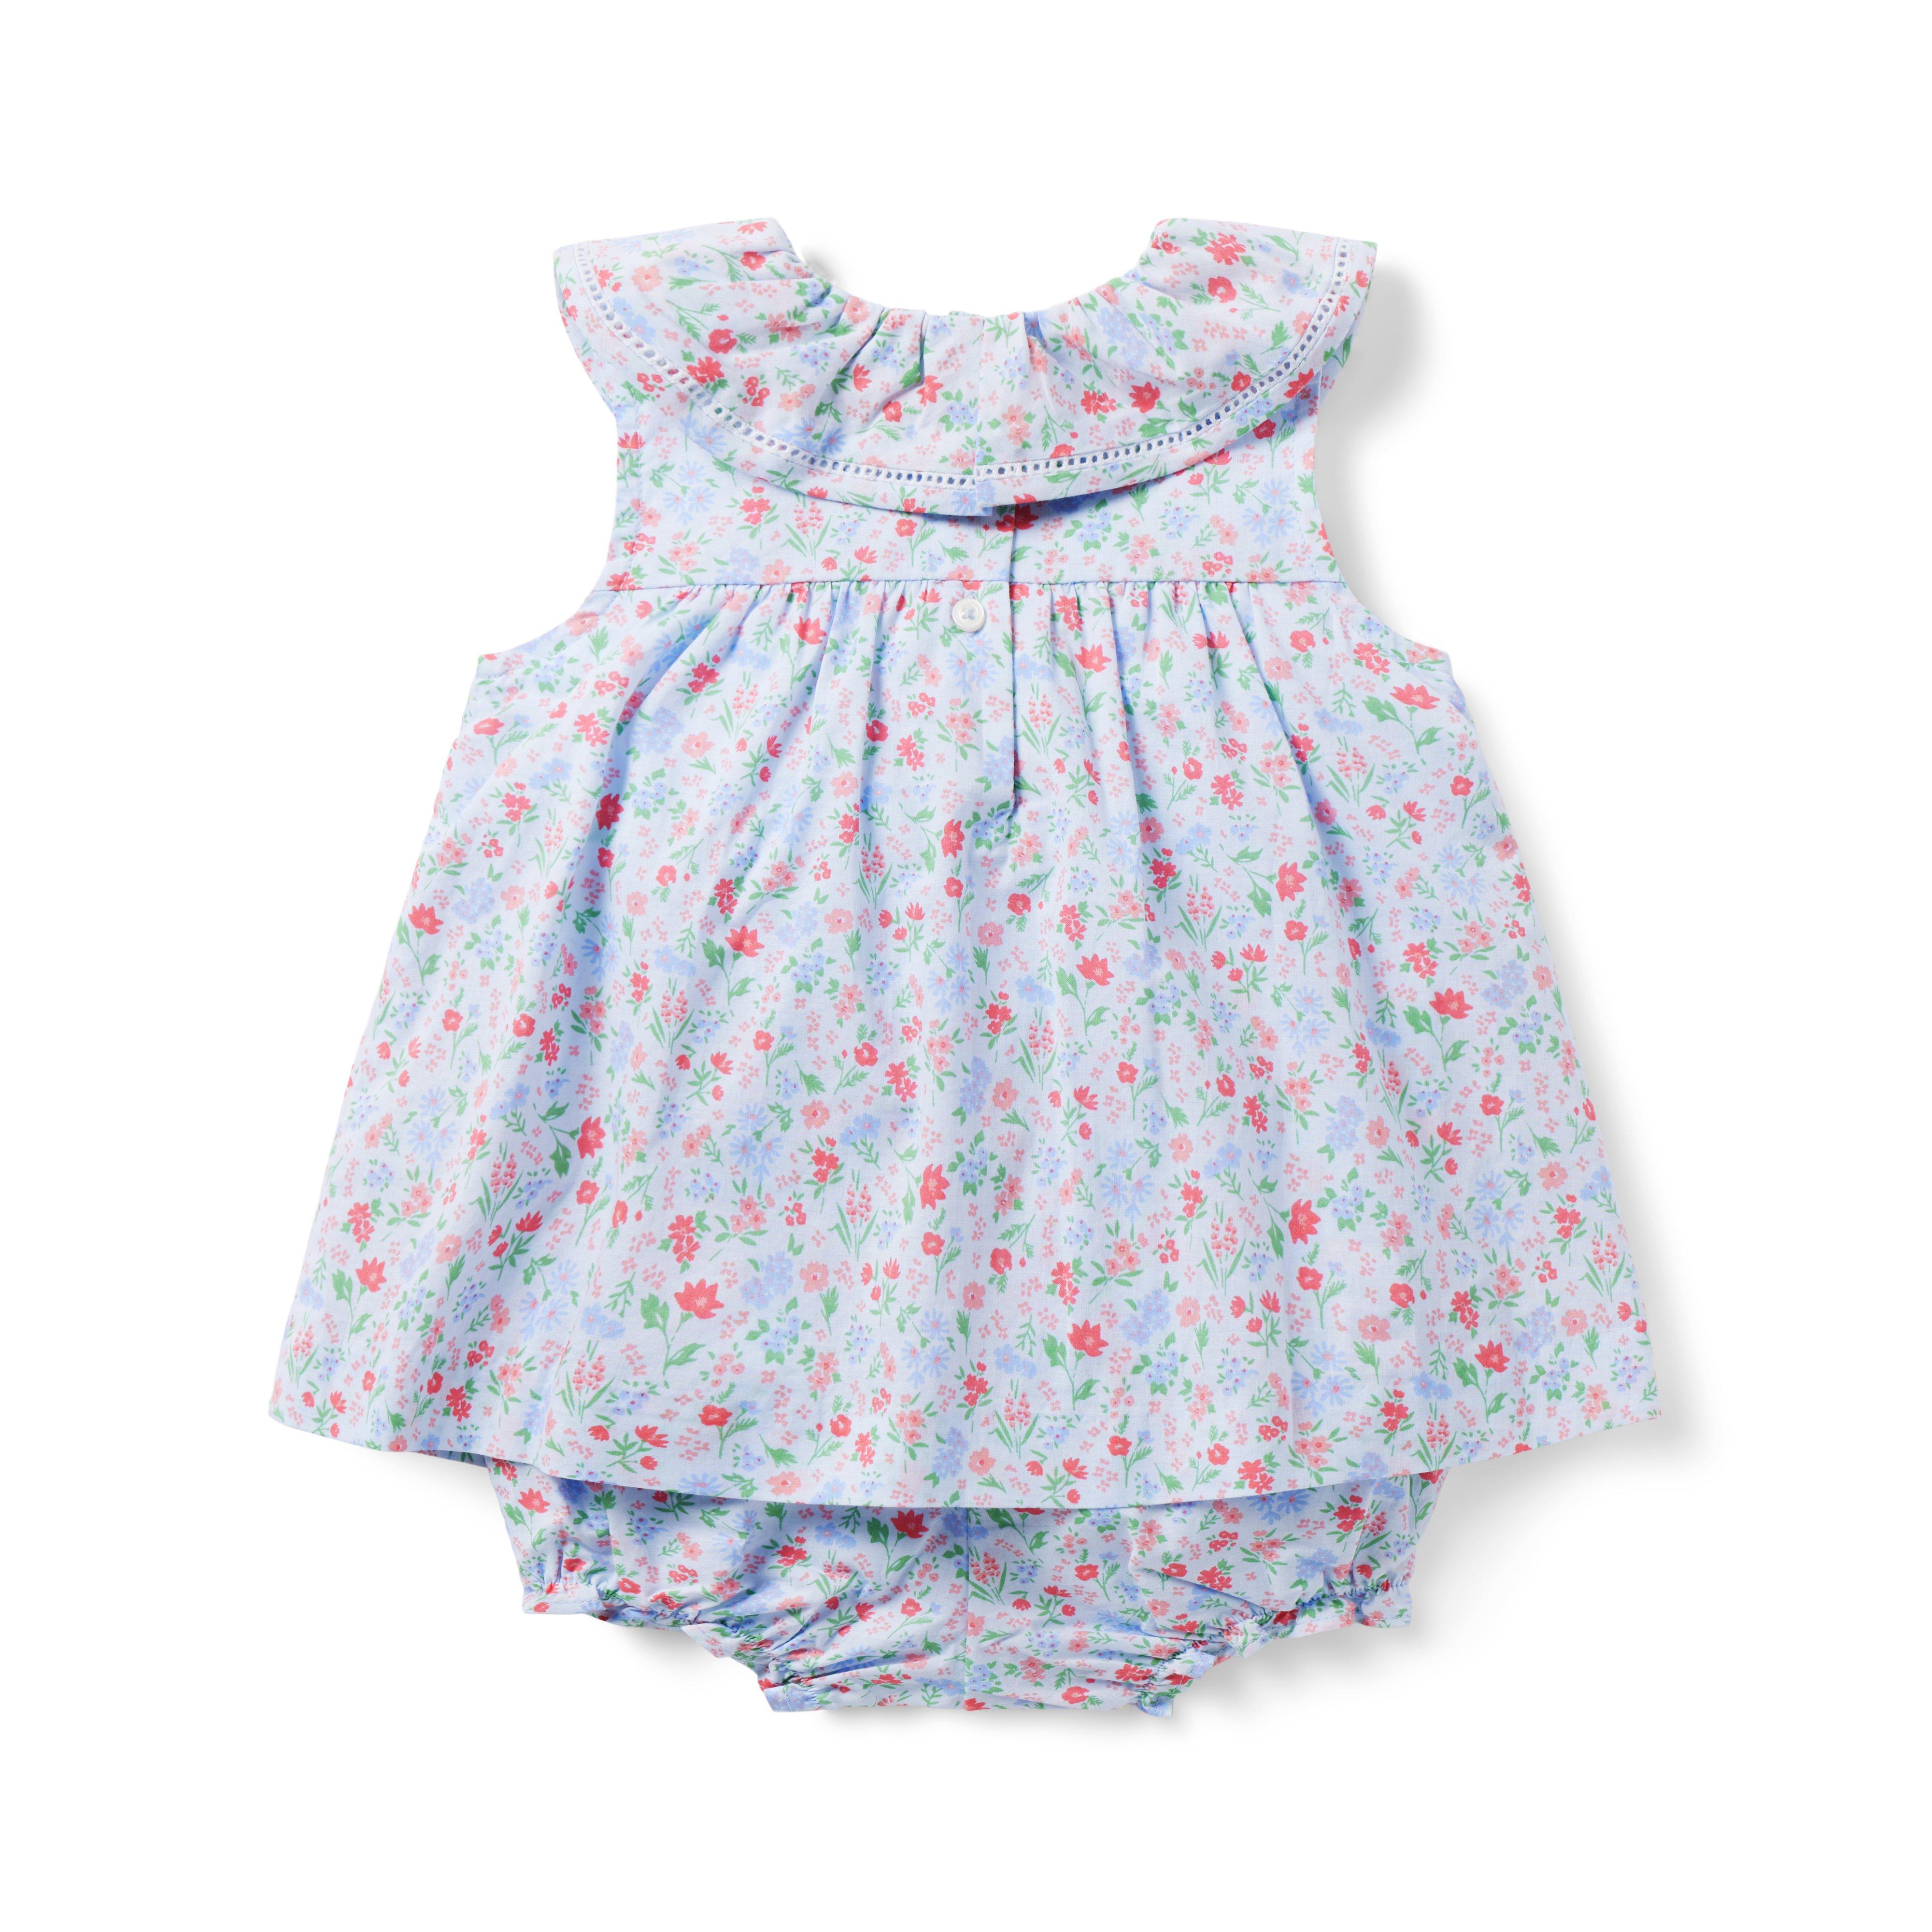 Newborn Bundle Blue Floral Baby Floral Ruffle Romper by Janie and Jack